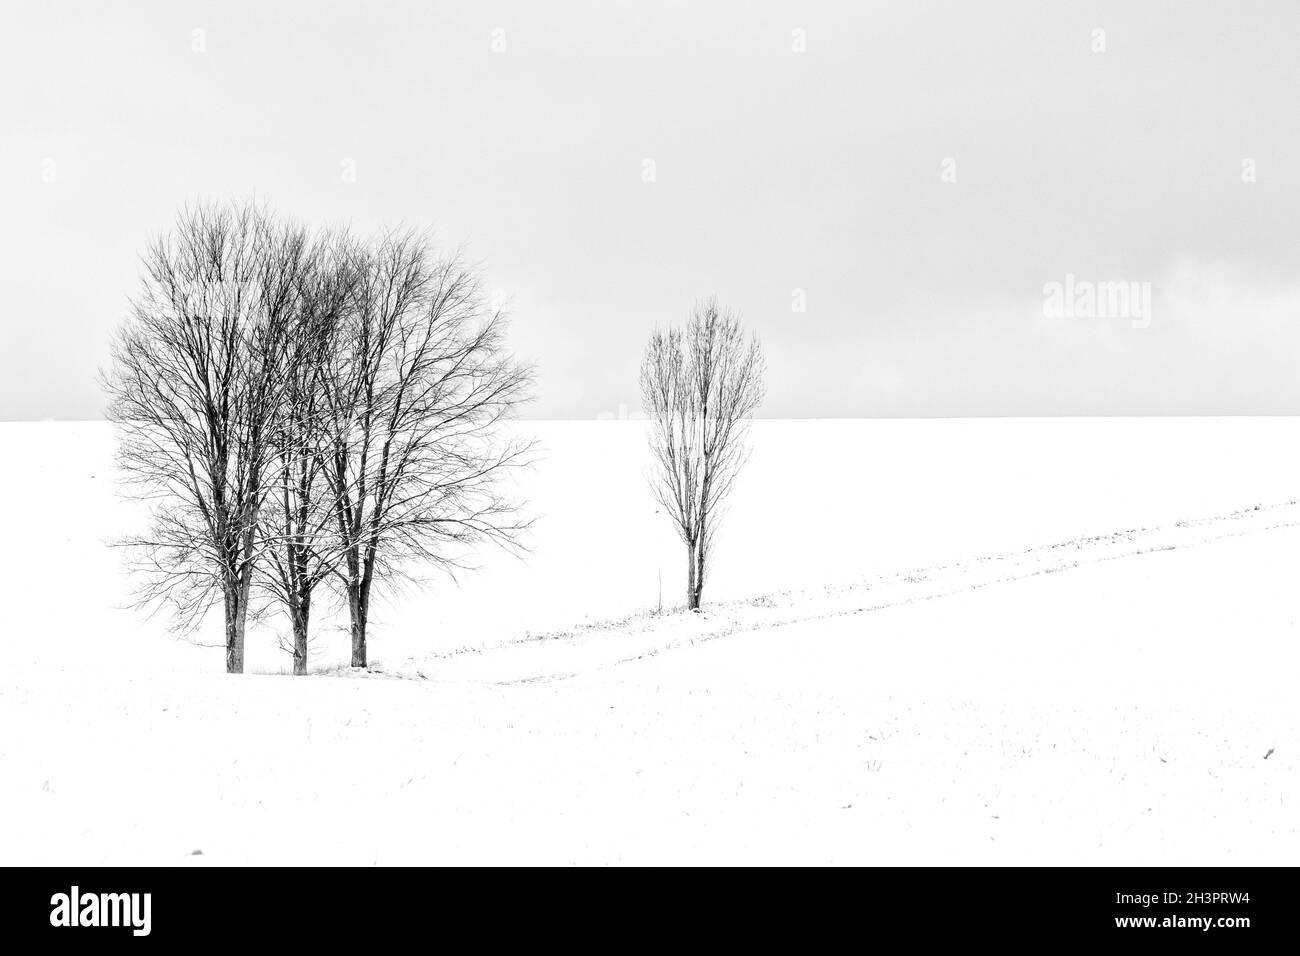 Landscape in the Harz mountains single standing trees Stock Photo